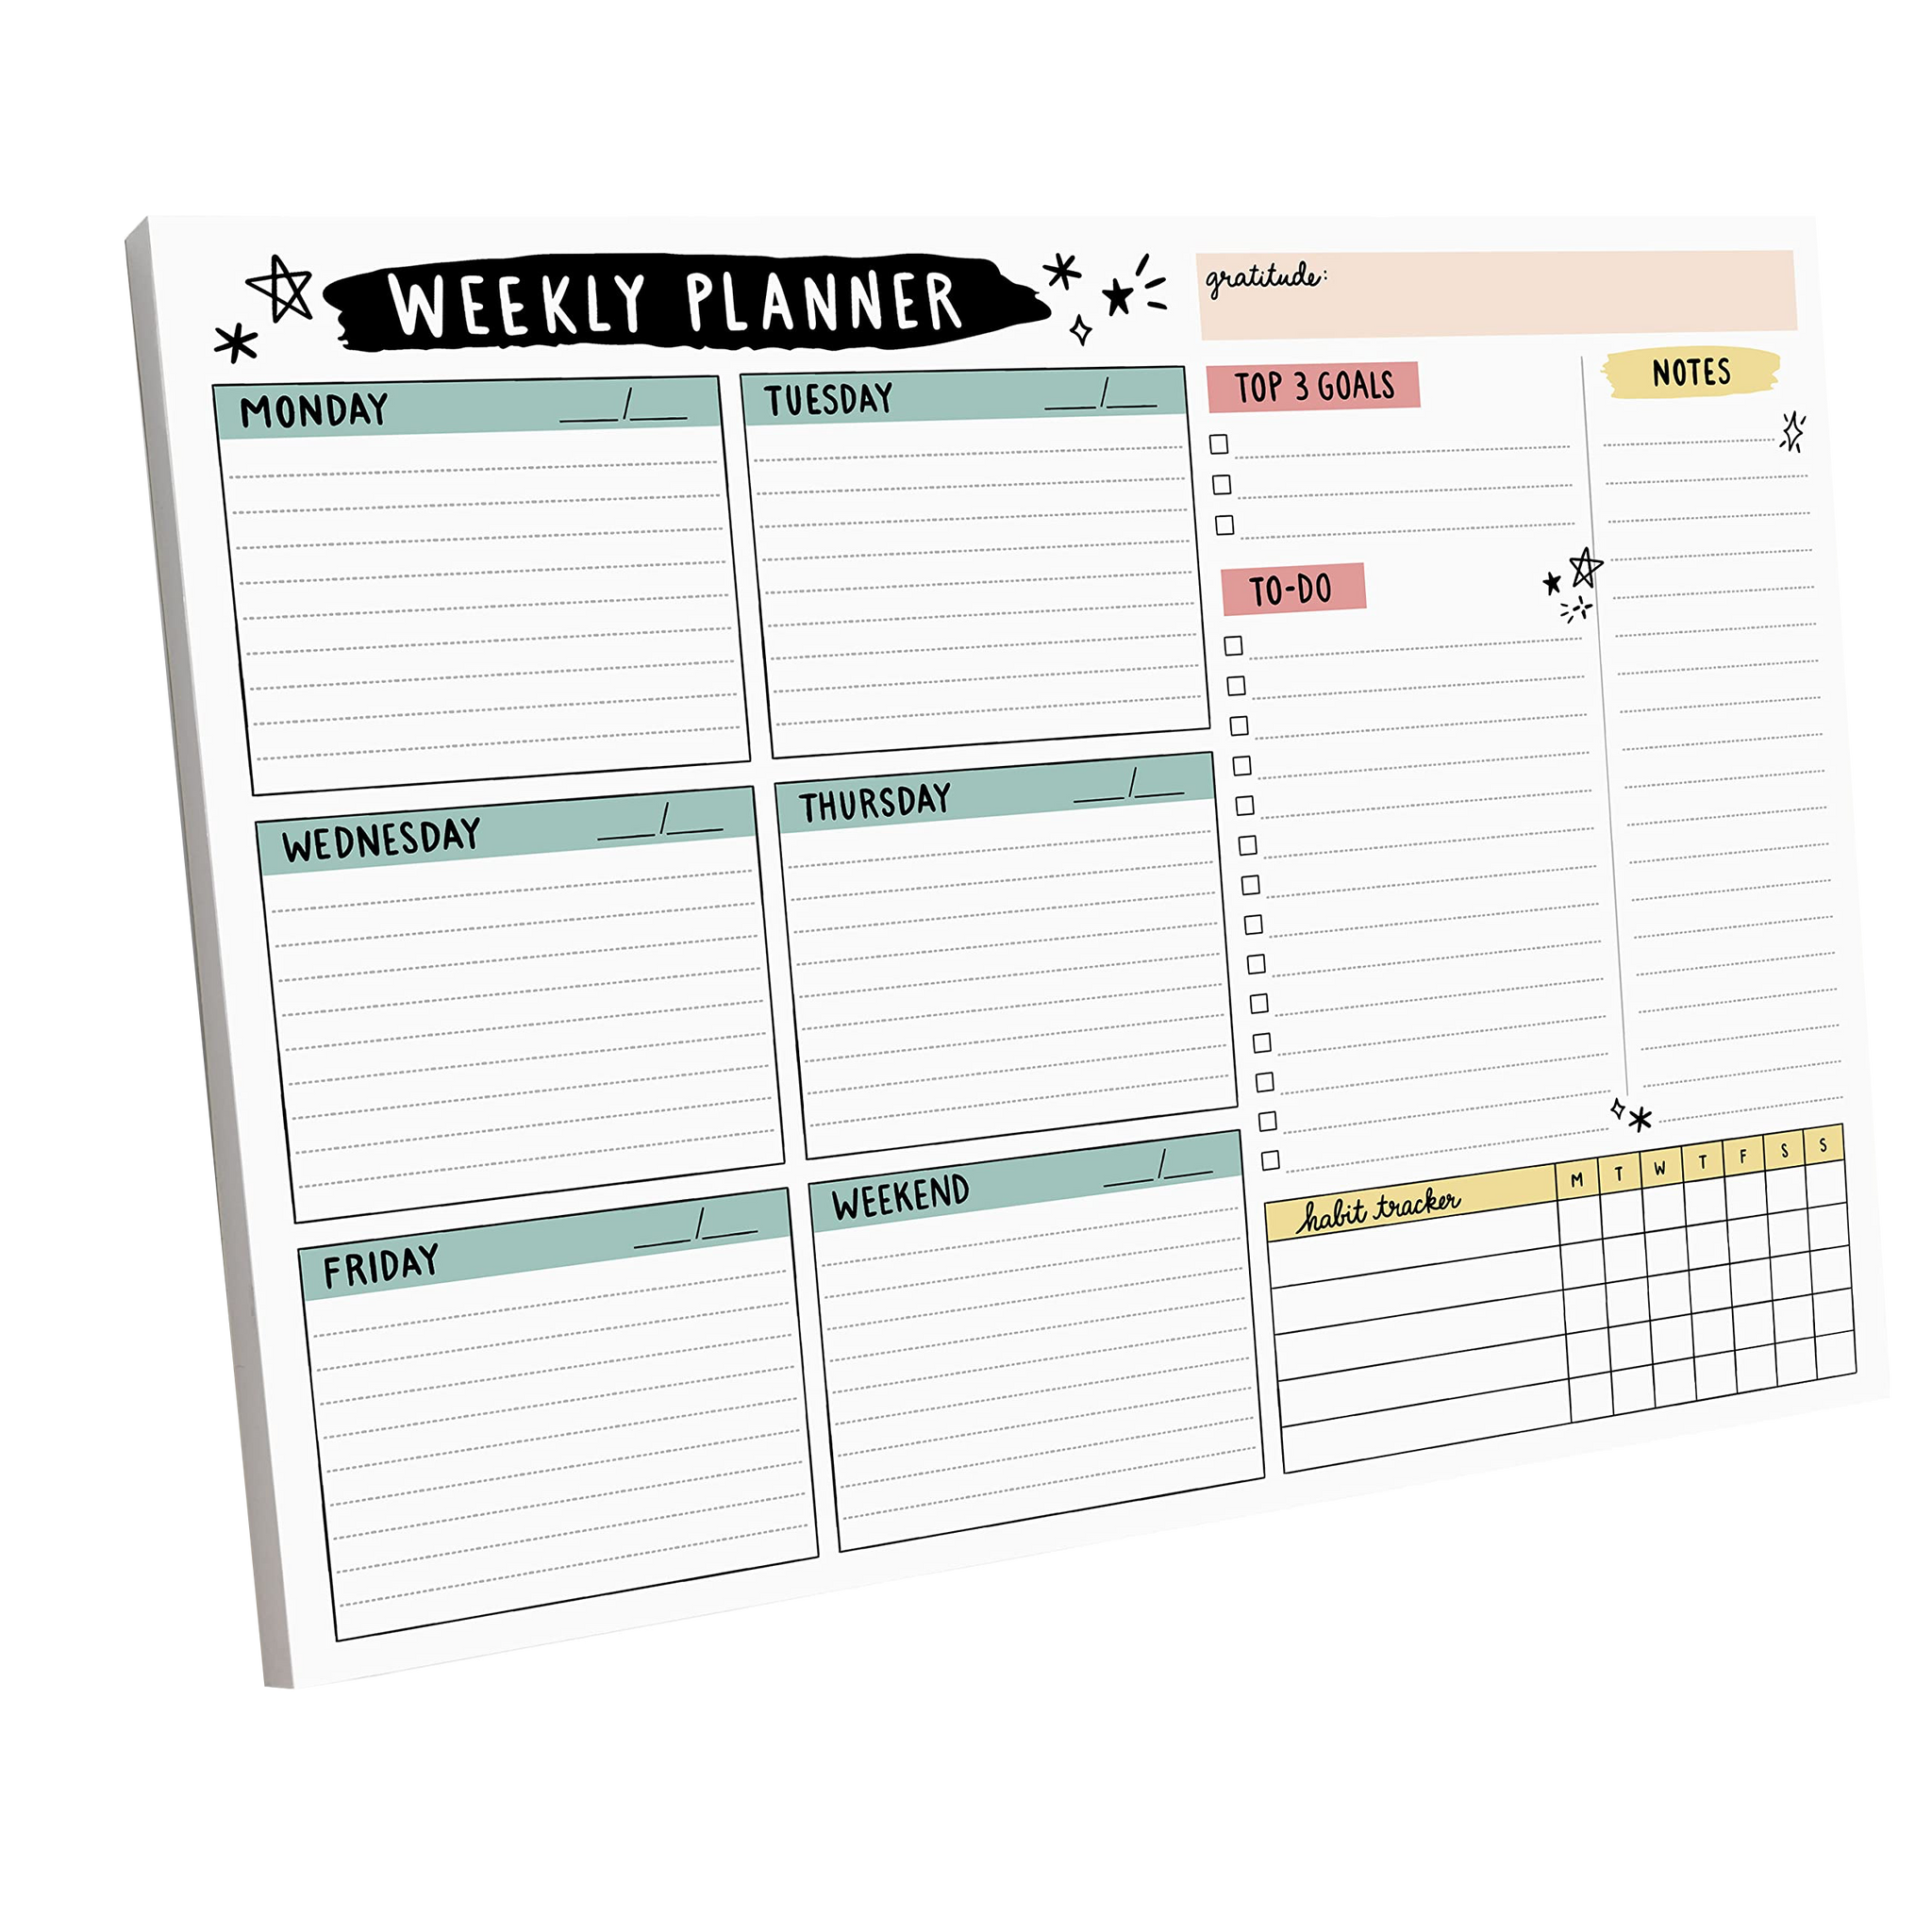 Full Color Note Pads - 8.5" x 11" - 50 Sheets